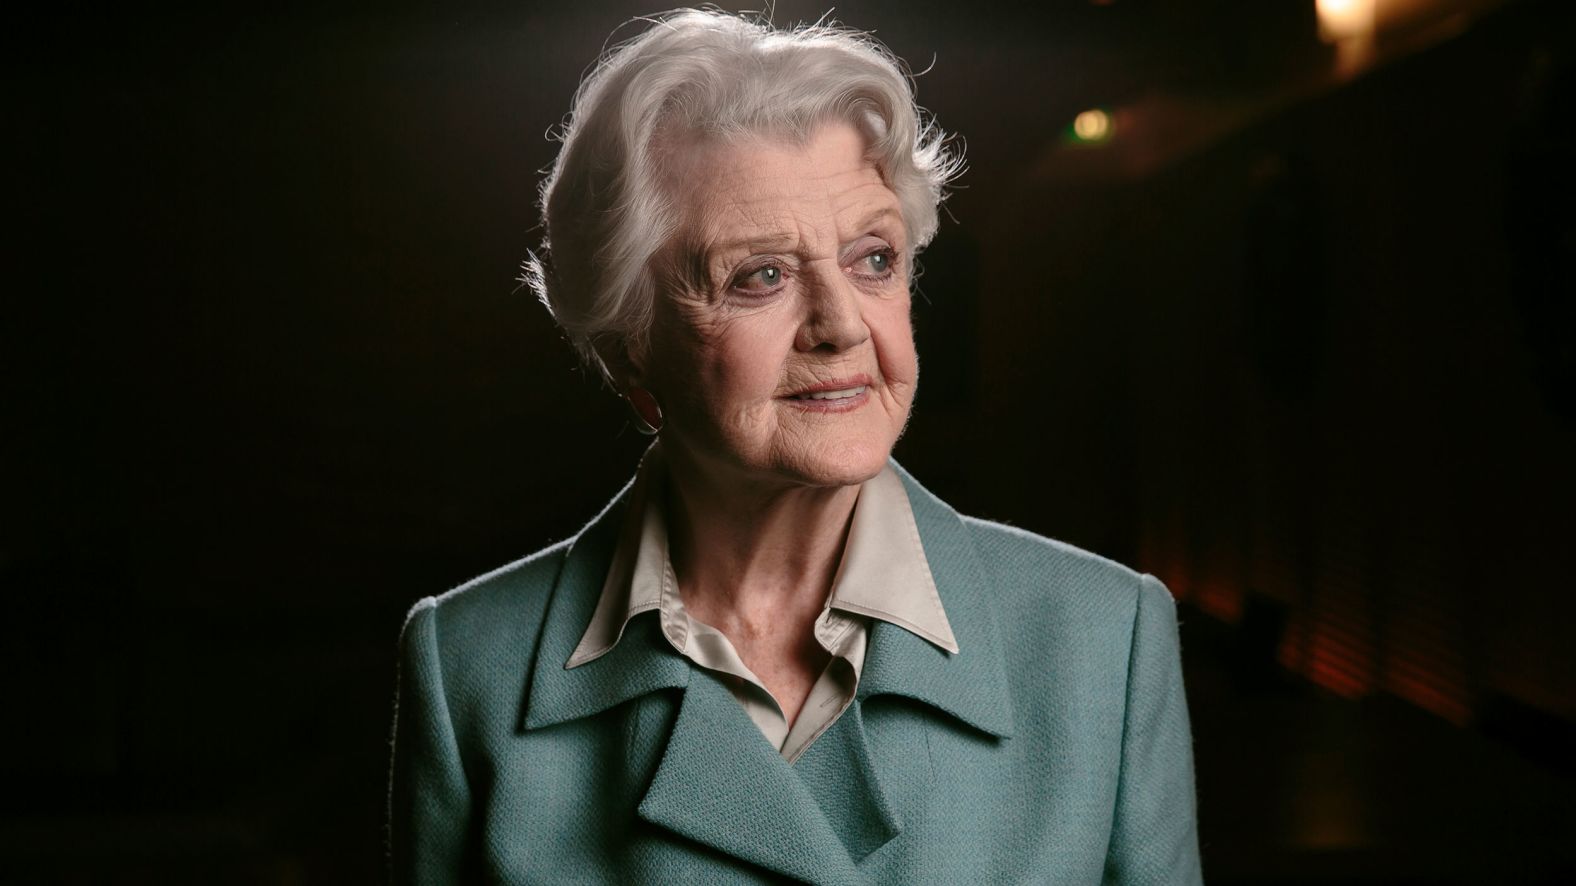 <a href="index.php?page=&url=https%3A%2F%2Fwww.cnn.com%2F2022%2F10%2F11%2Fentertainment%2Fangela-lansbury-dead%2Findex.html" target="_blank">Angela Lansbury,</a> who enjoyed an eclectic, award-winning movie and stage career in addition to becoming America's favorite TV sleuth in "Murder, She Wrote," died on October 11. She was 96.